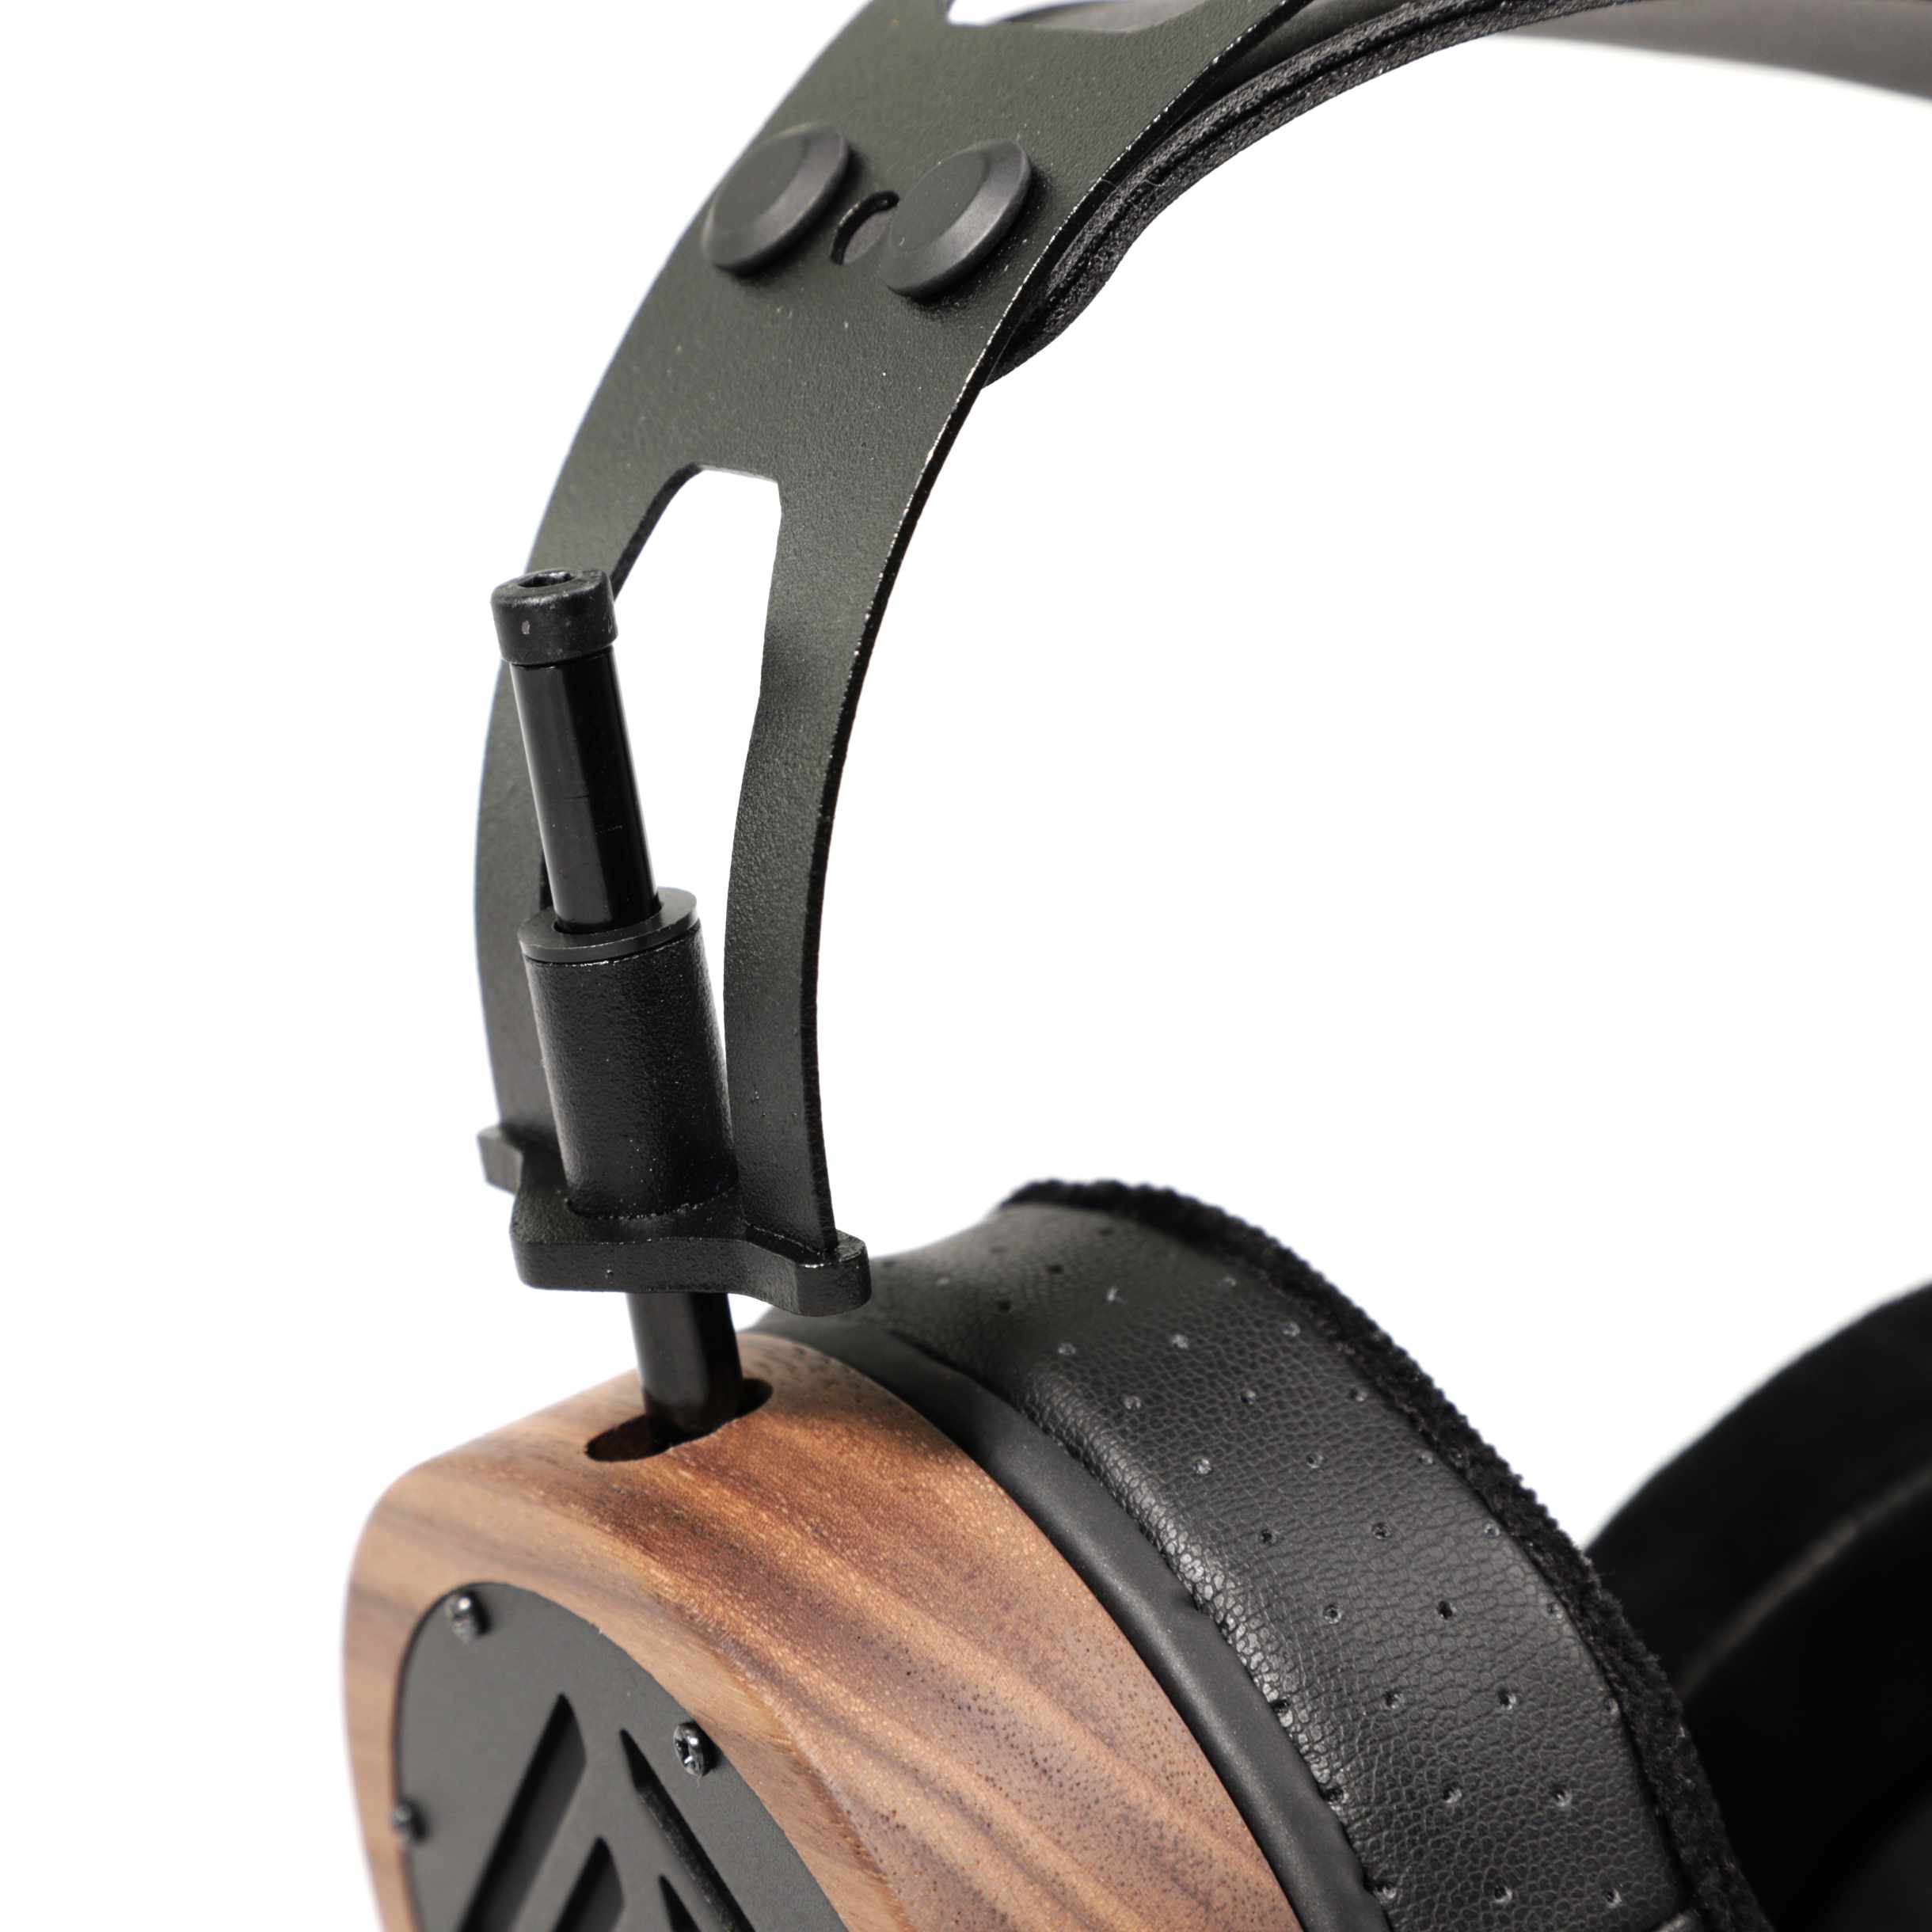 S5X headphones for mixing spatial audio e.g. Dolby Atmos or Sony 